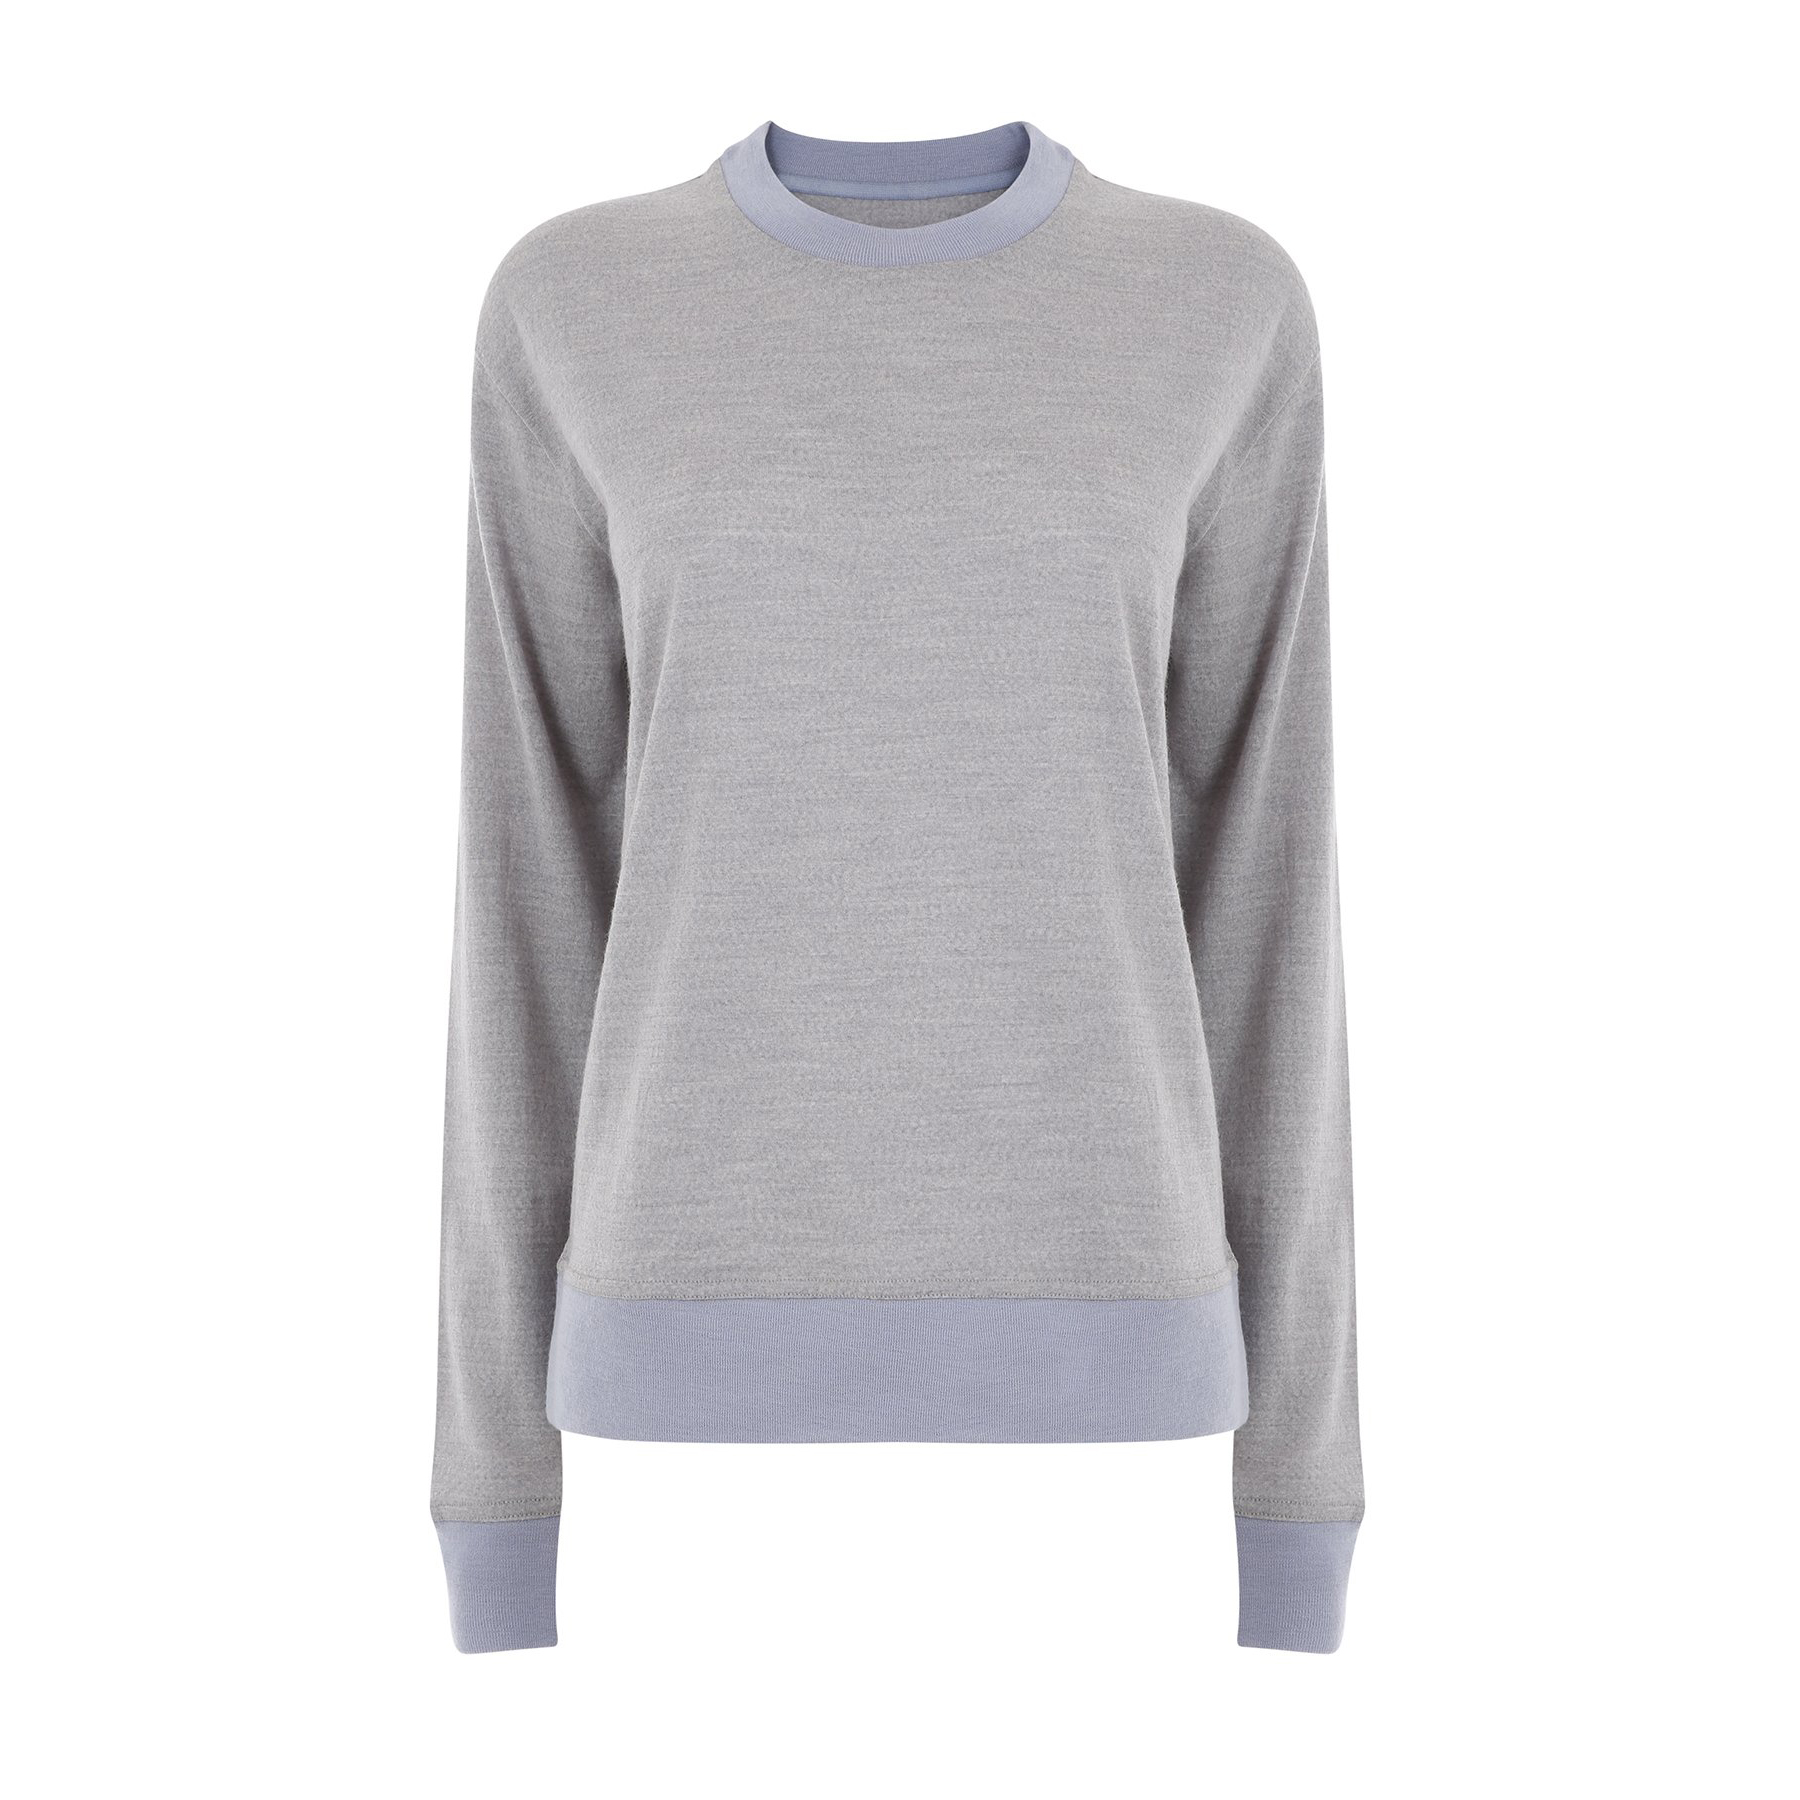 Luxe and hardy reset jumper - Hip & Healthy